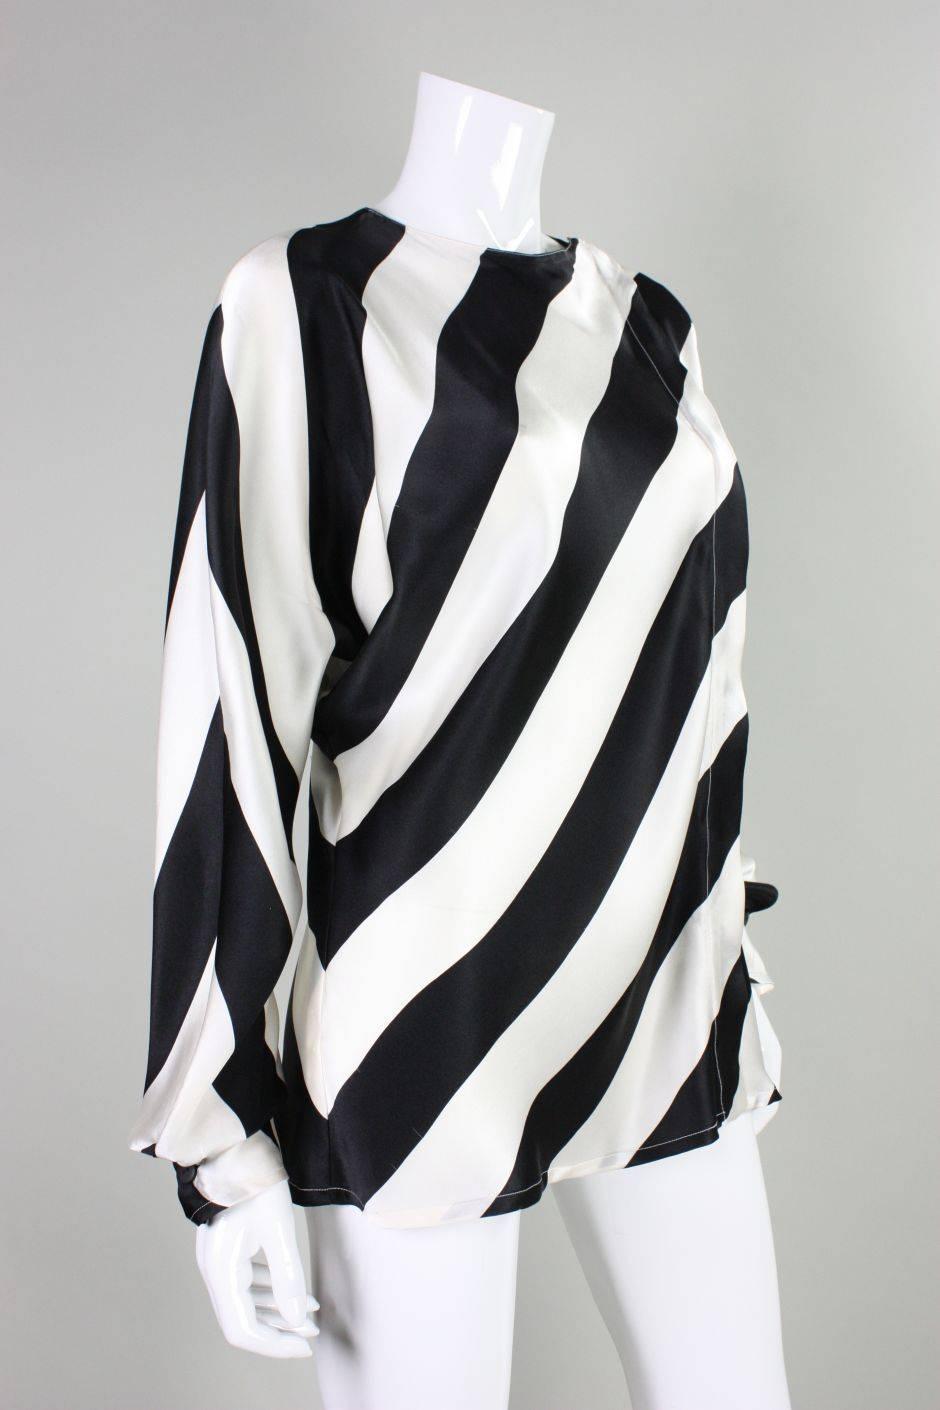 This blouse from Krizia dates to the 1980's and is made of silk charmeuse with a black and white diagonal print.  Dolman sleeves with buttoned cuffs.  Off-center lapped button front closures. Unlined.